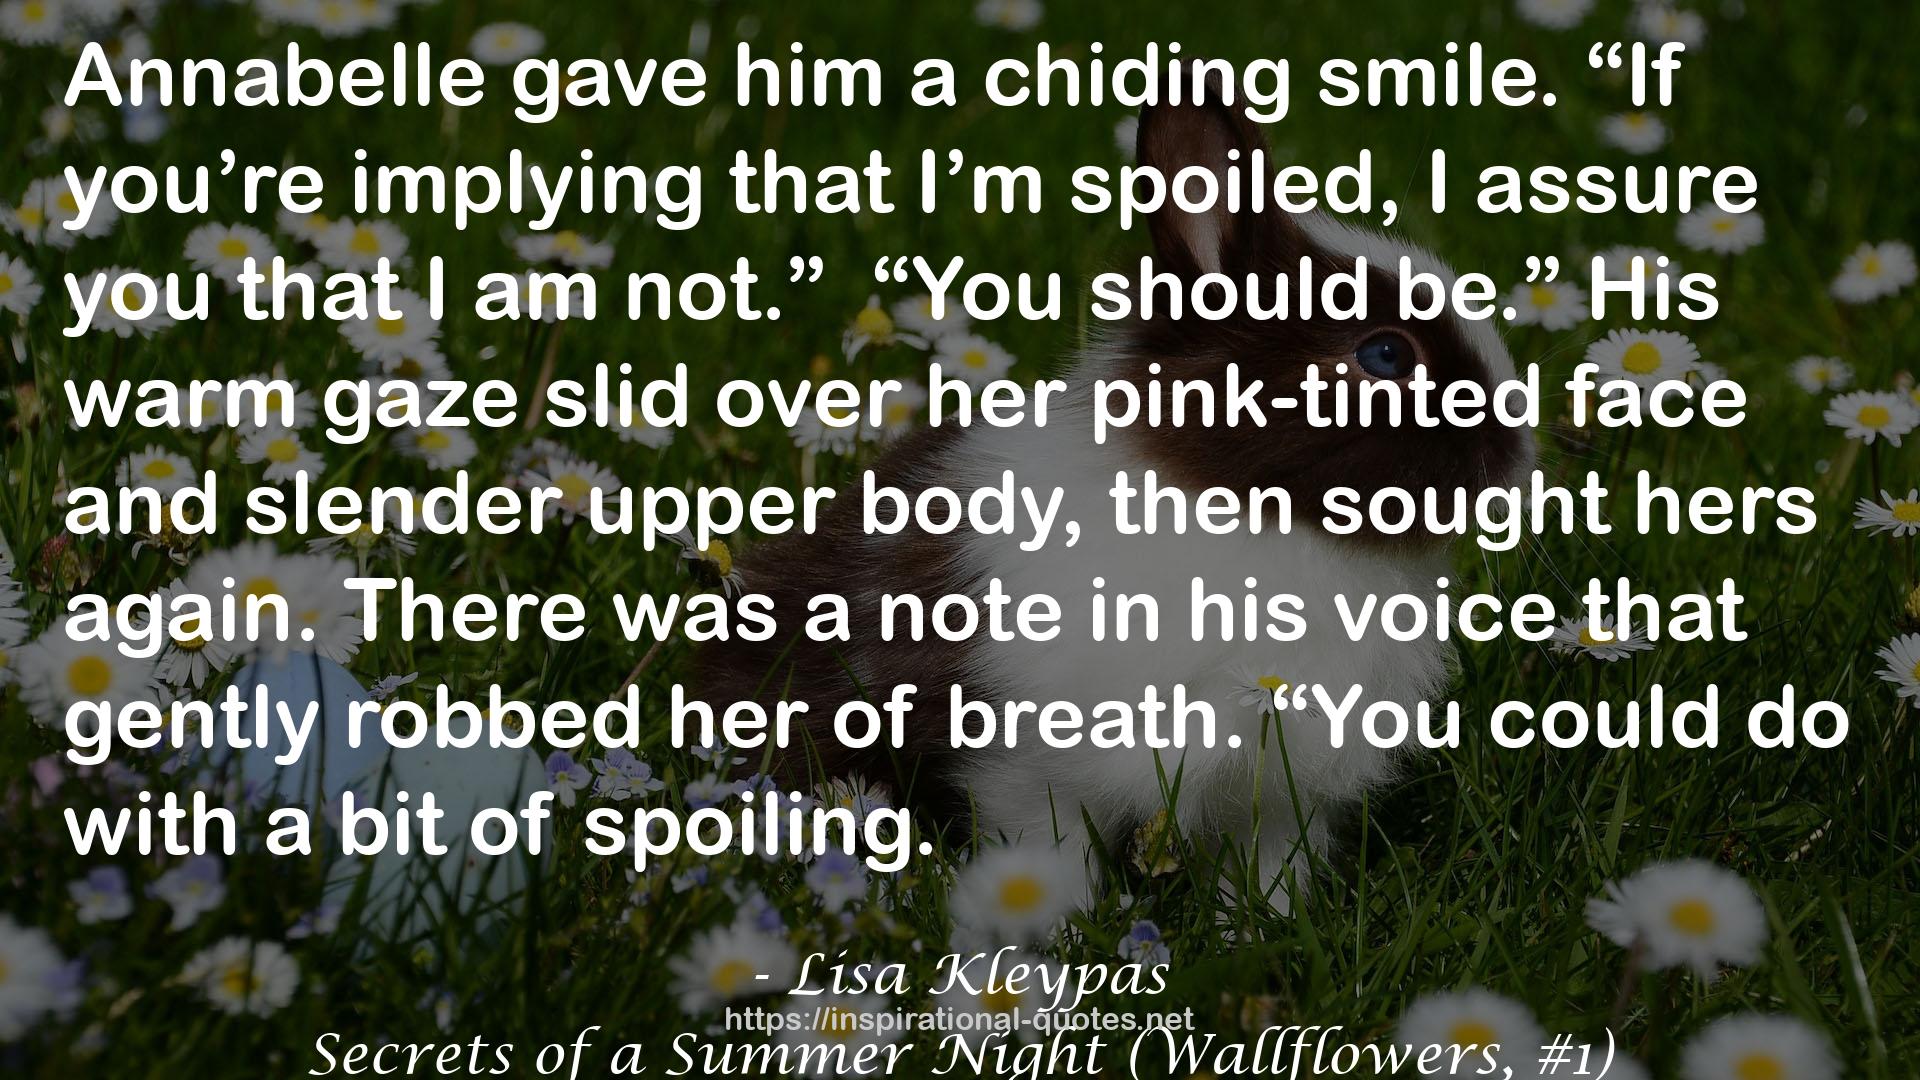 Secrets of a Summer Night (Wallflowers, #1) QUOTES